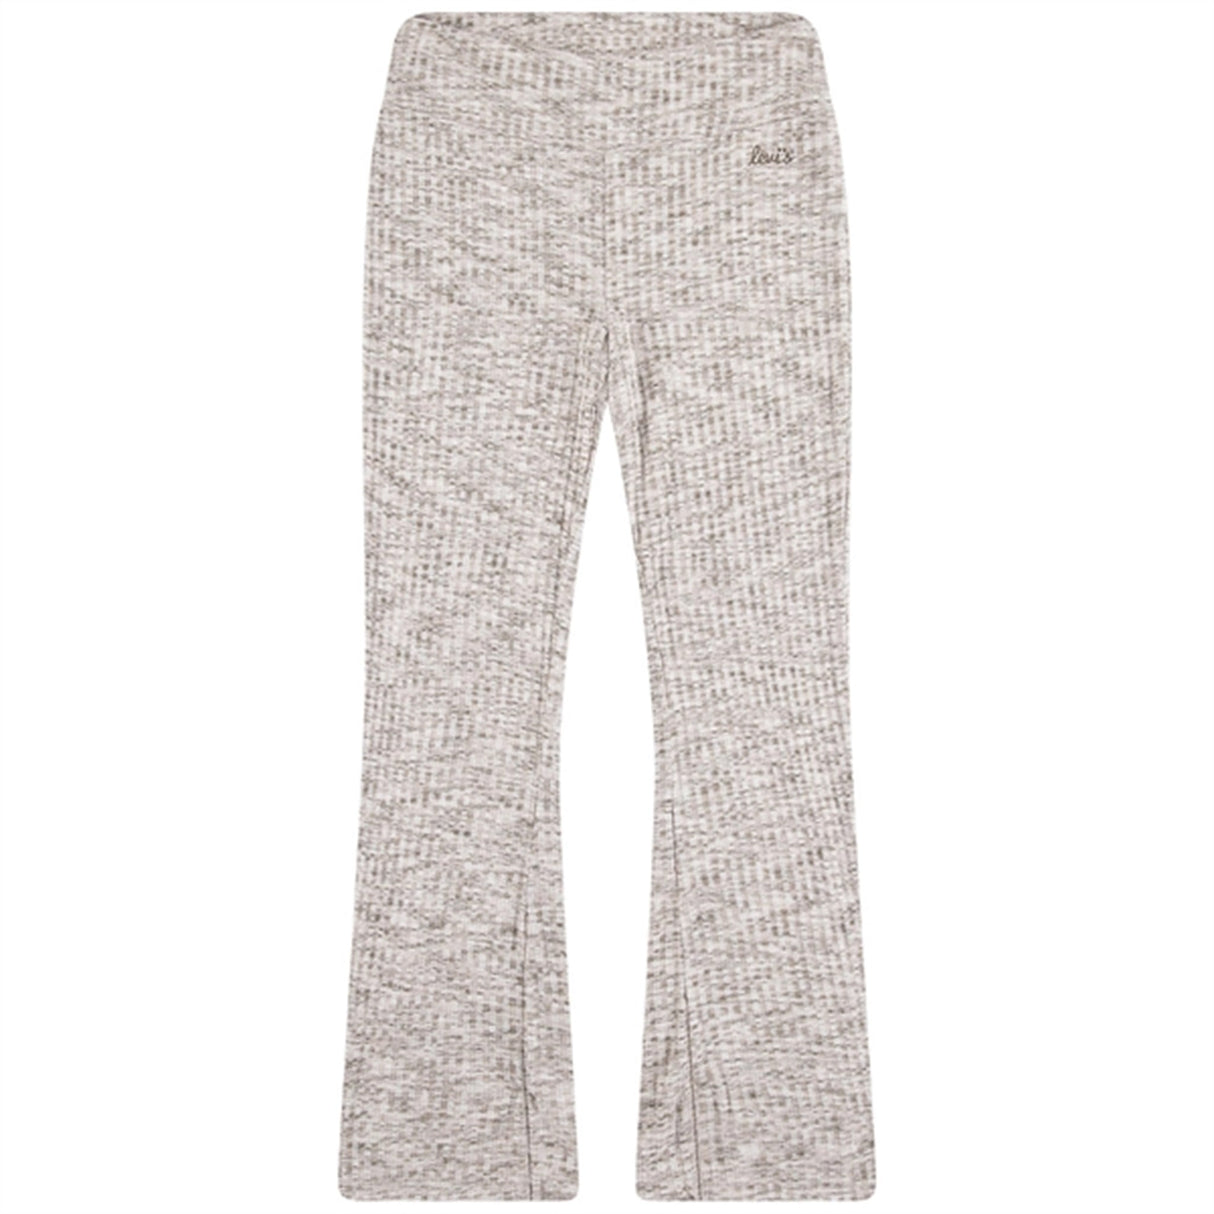 Levi's Space Dye Flared Knit Pants Creme Brulee